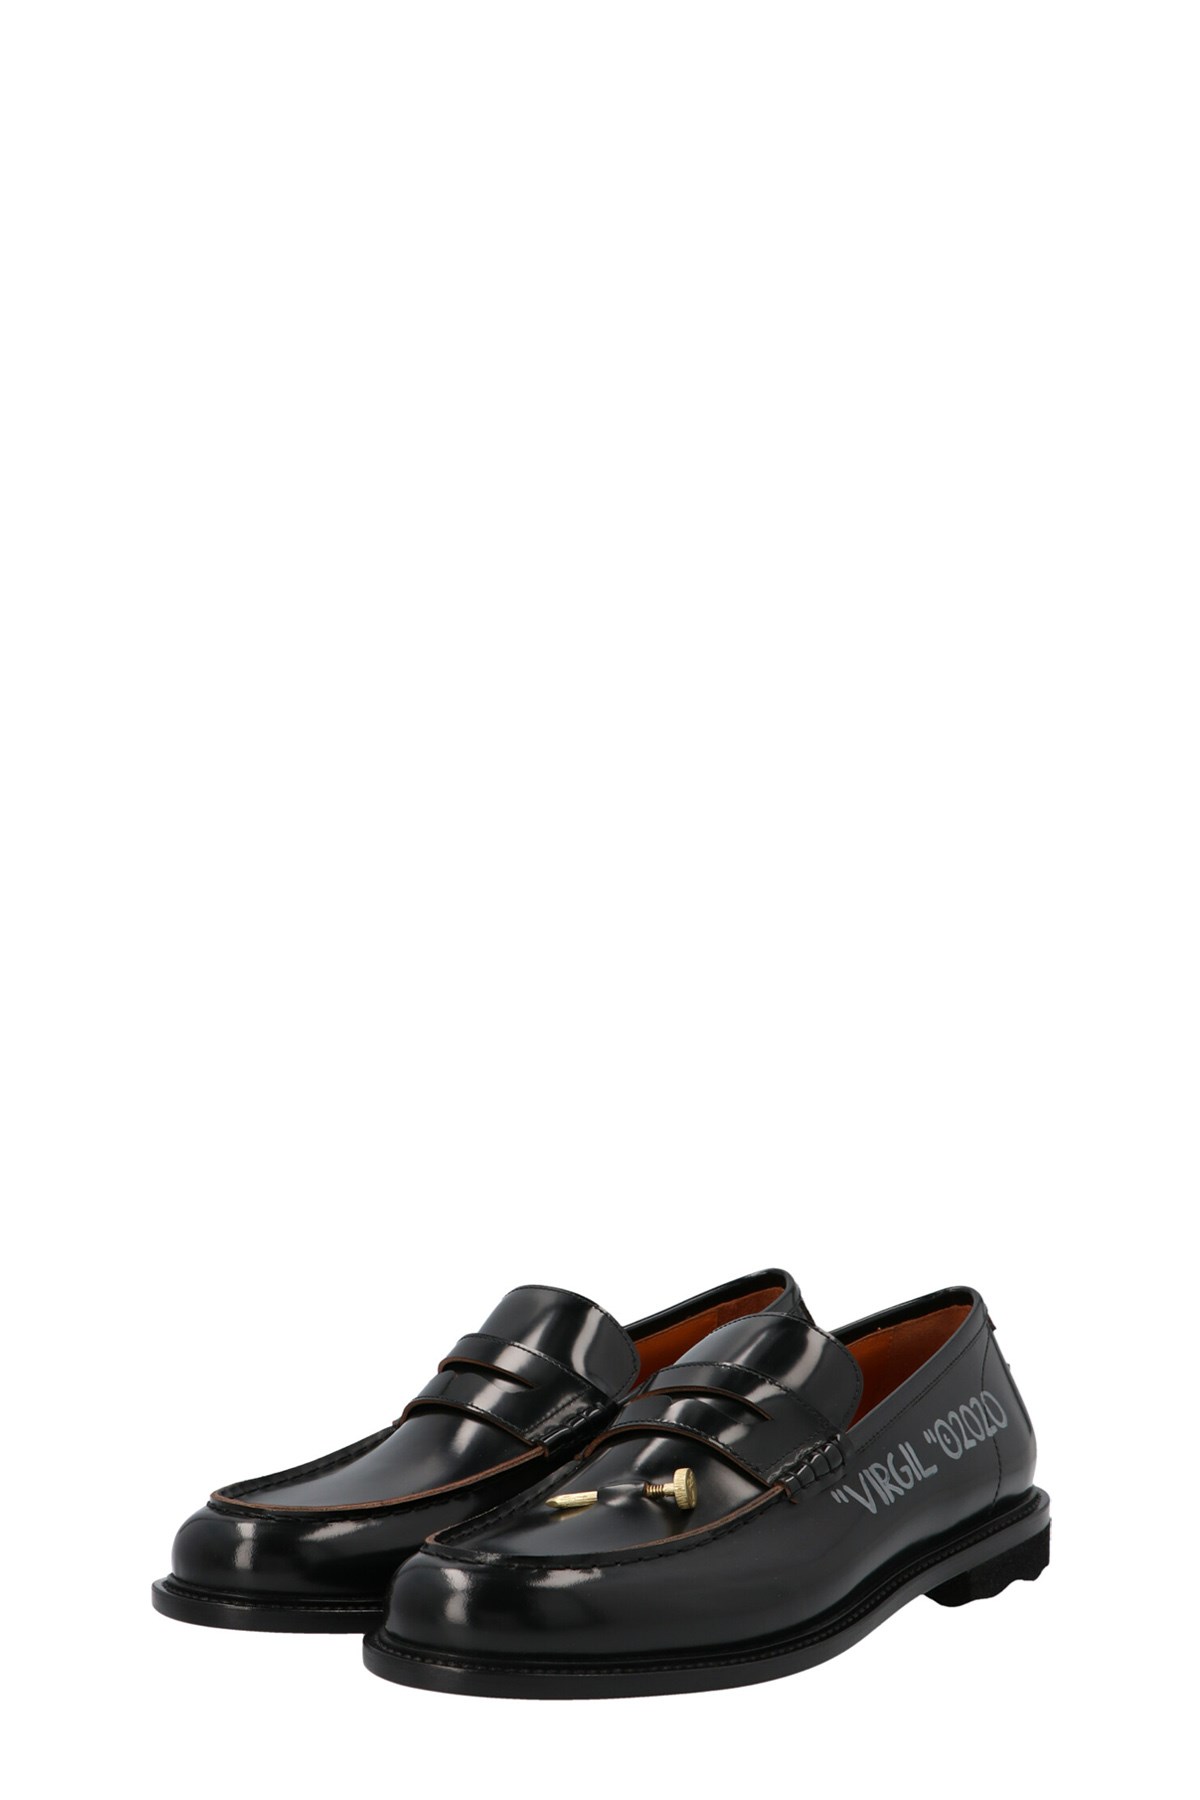 OFF-WHITE Offkat Collab. – Loafers